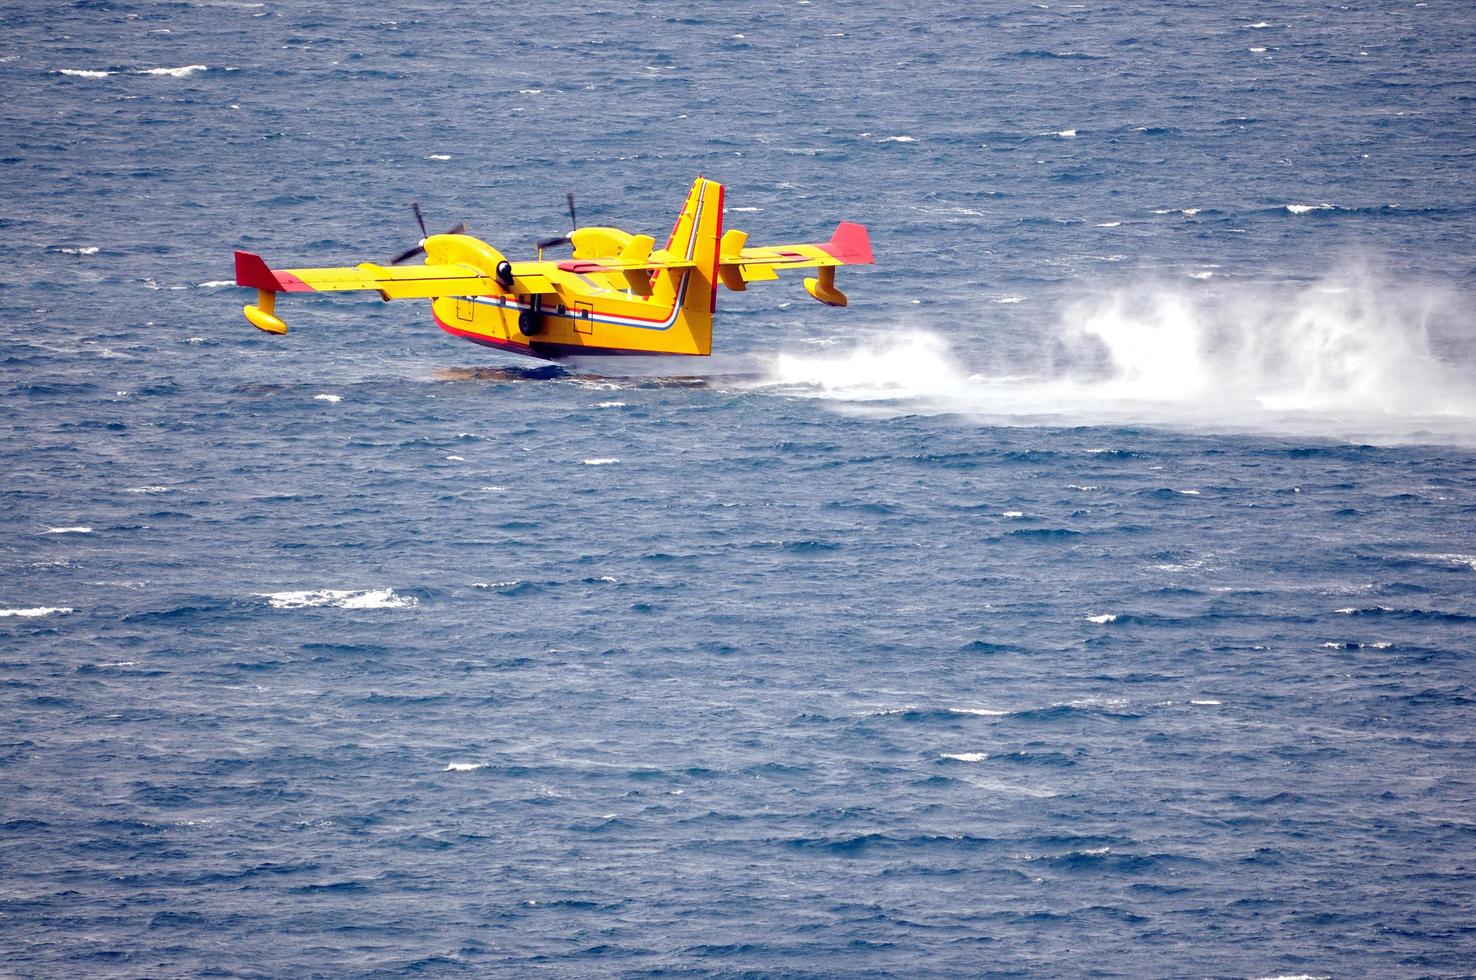 Sweden, 2022 - Airplane on sea taking water photo